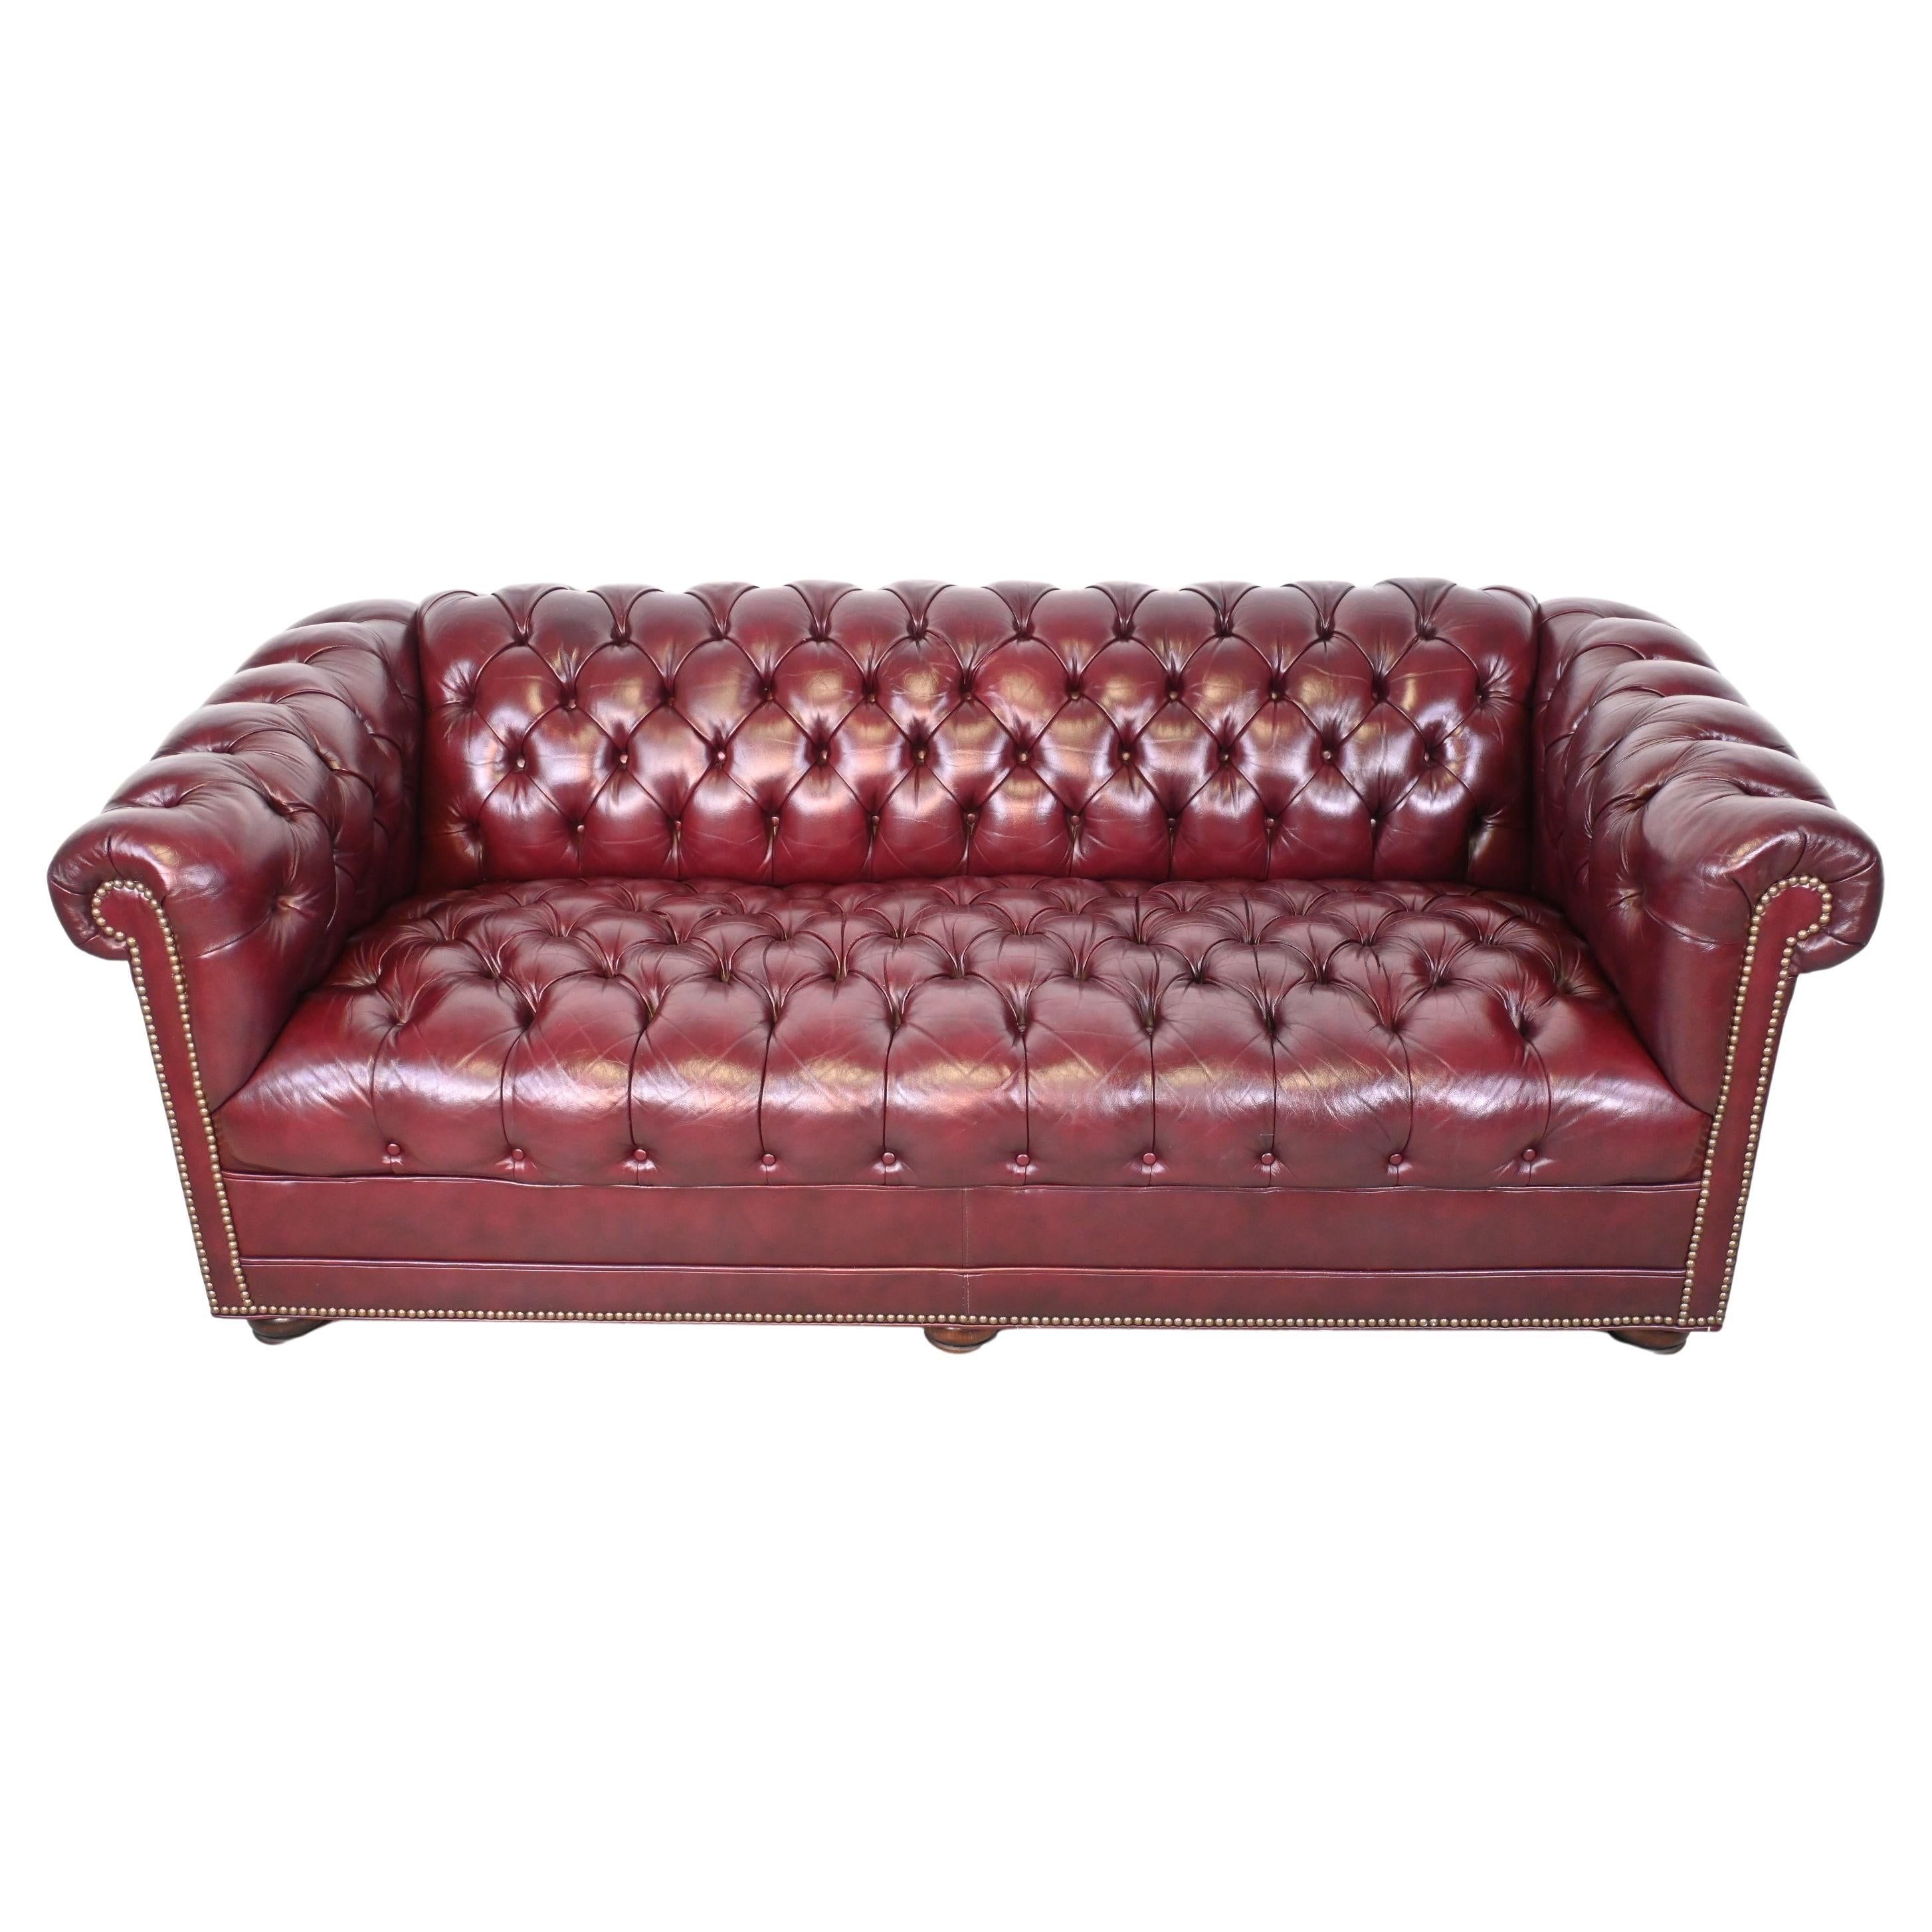 Burgundy Leather English Style Chesterfield Sofa